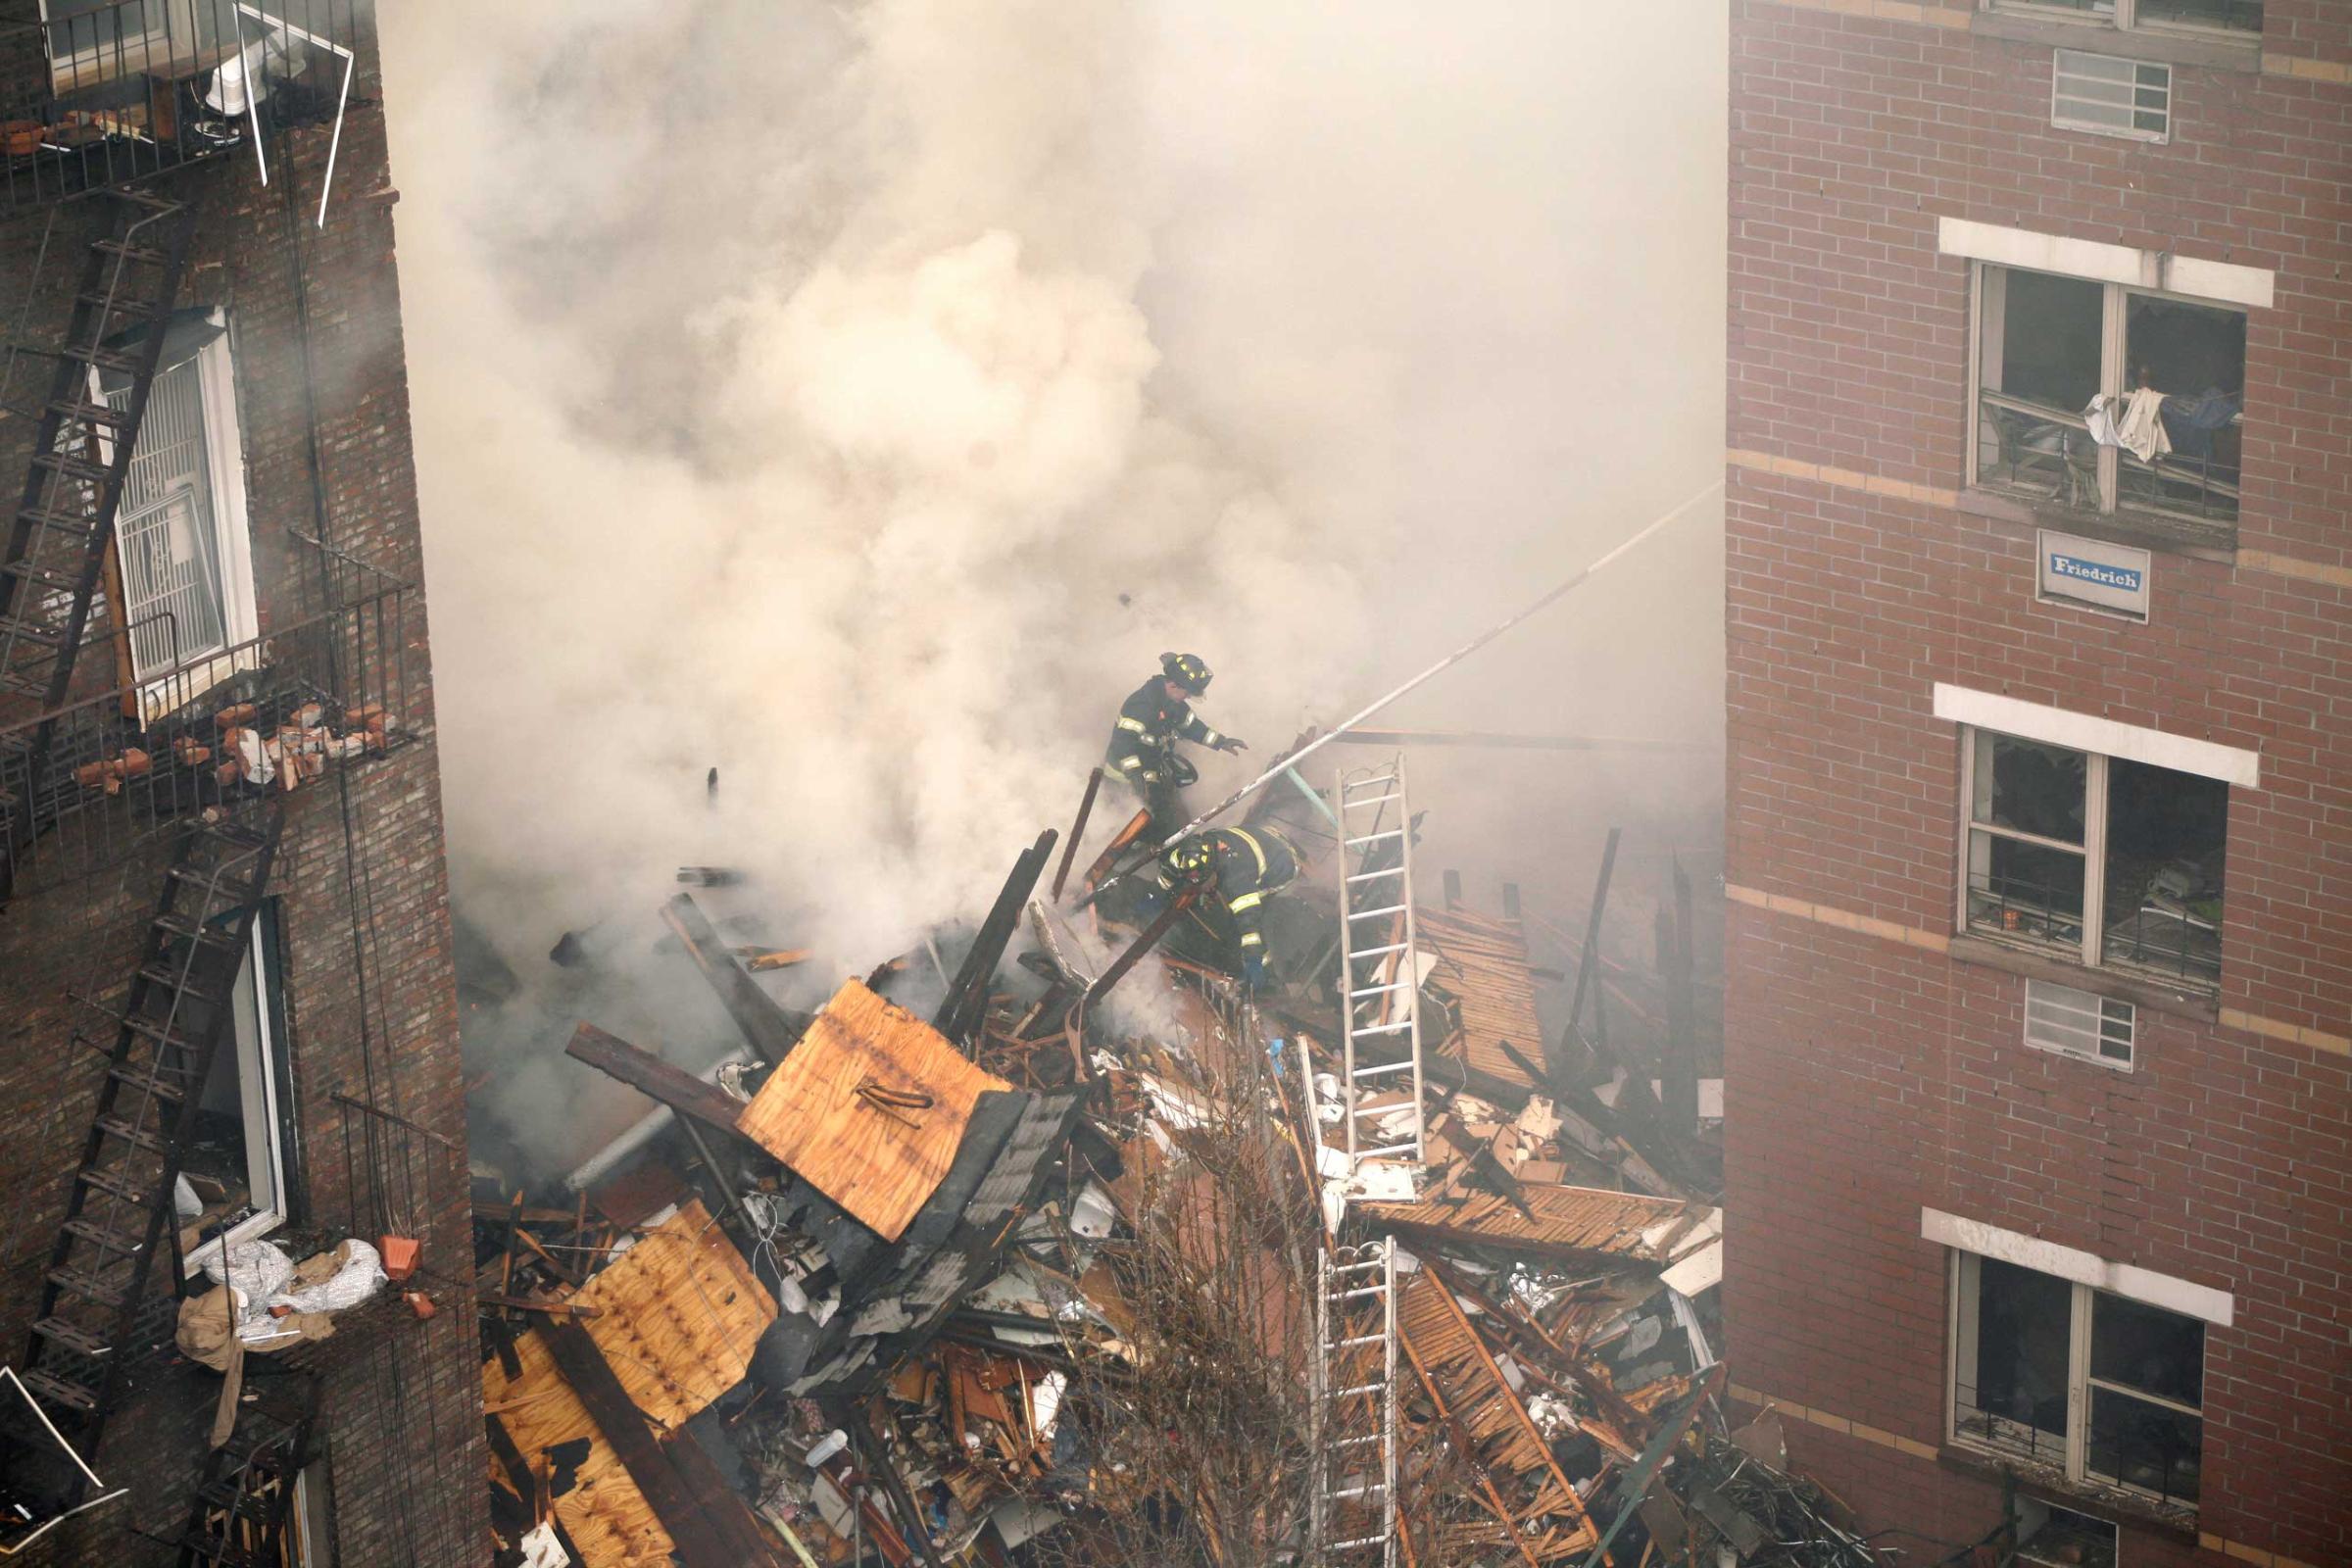 Firefighters scale a vast pile of debris that remained after a gas leak explosion destroyed two buildings on Park Avenue in the East Harlem neighborhood of New York.